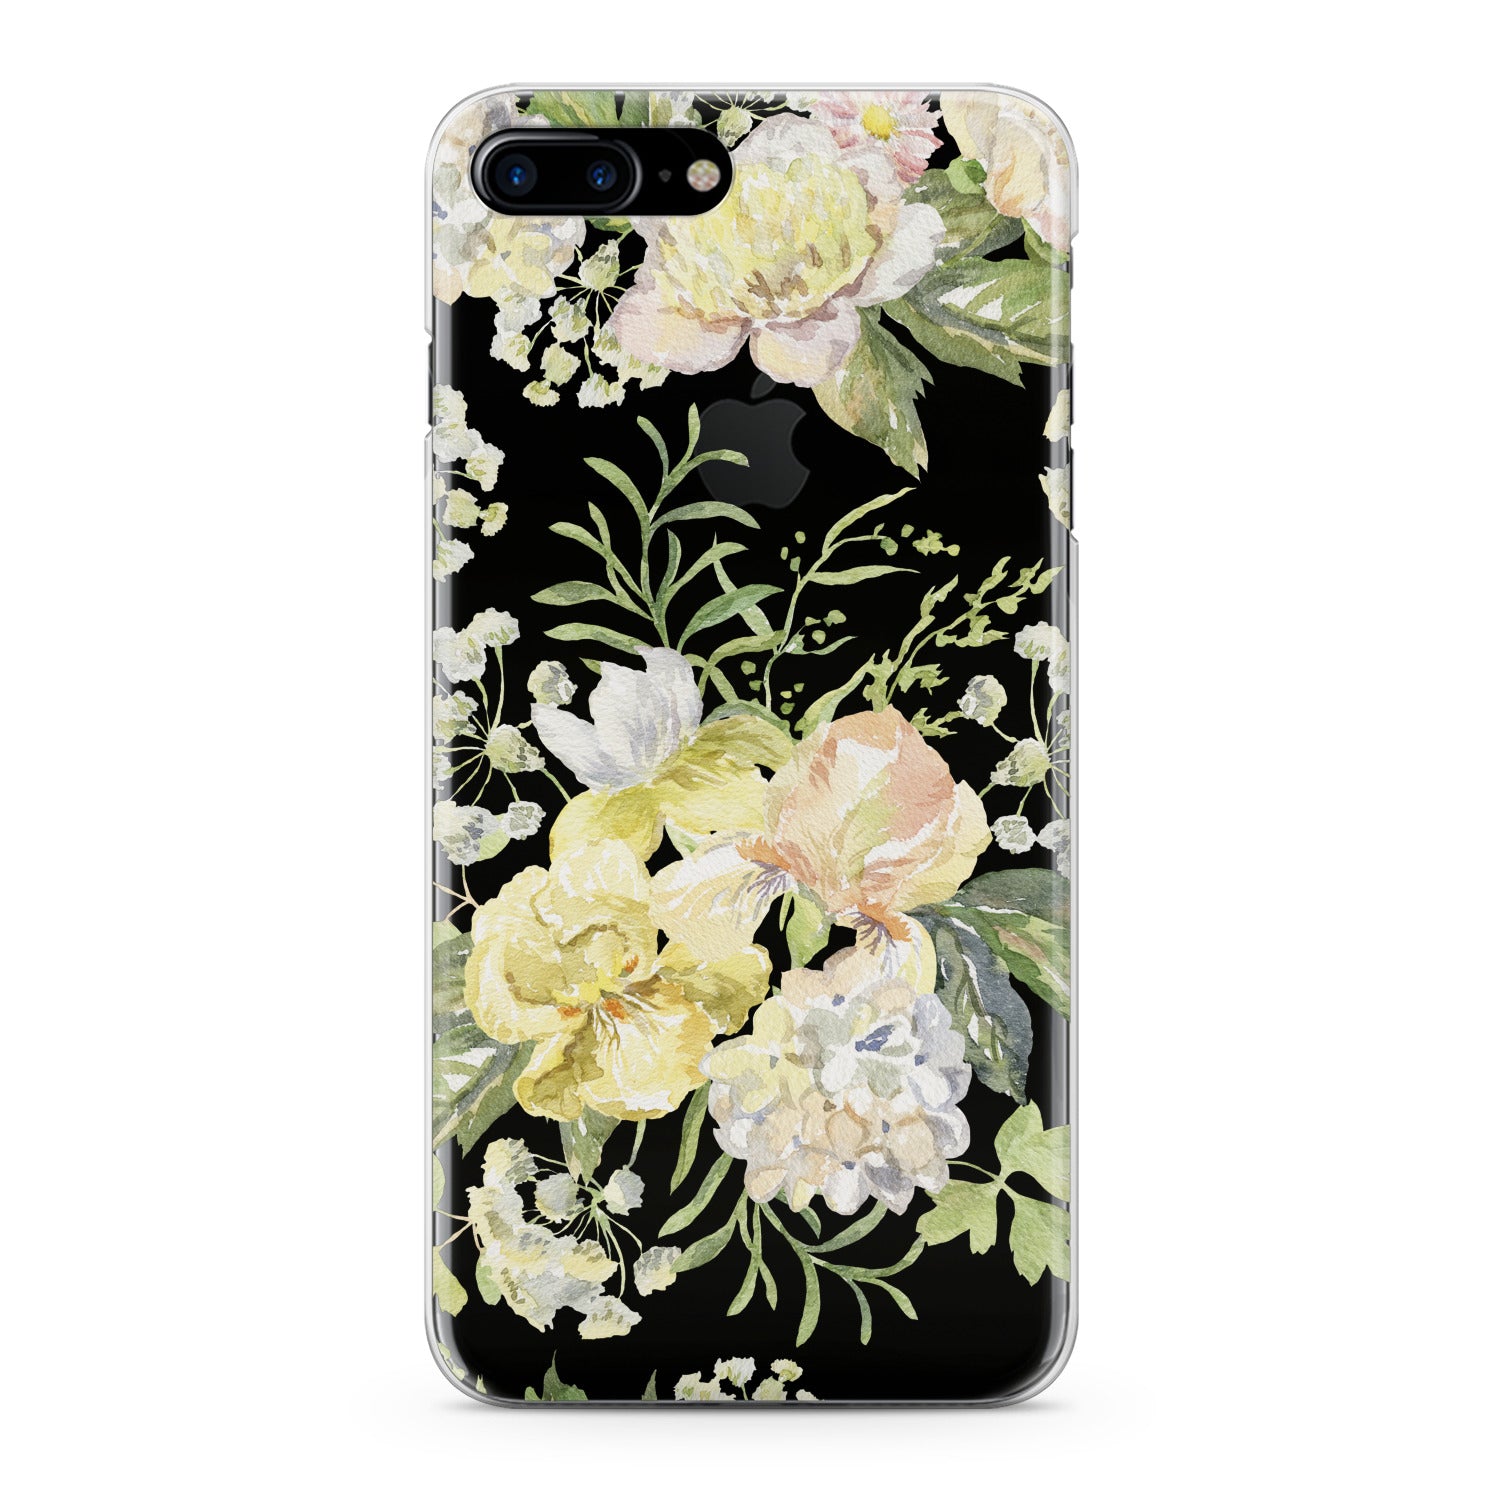 Lex Altern Sensitive Floral Theme Phone Case for your iPhone & Android phone.